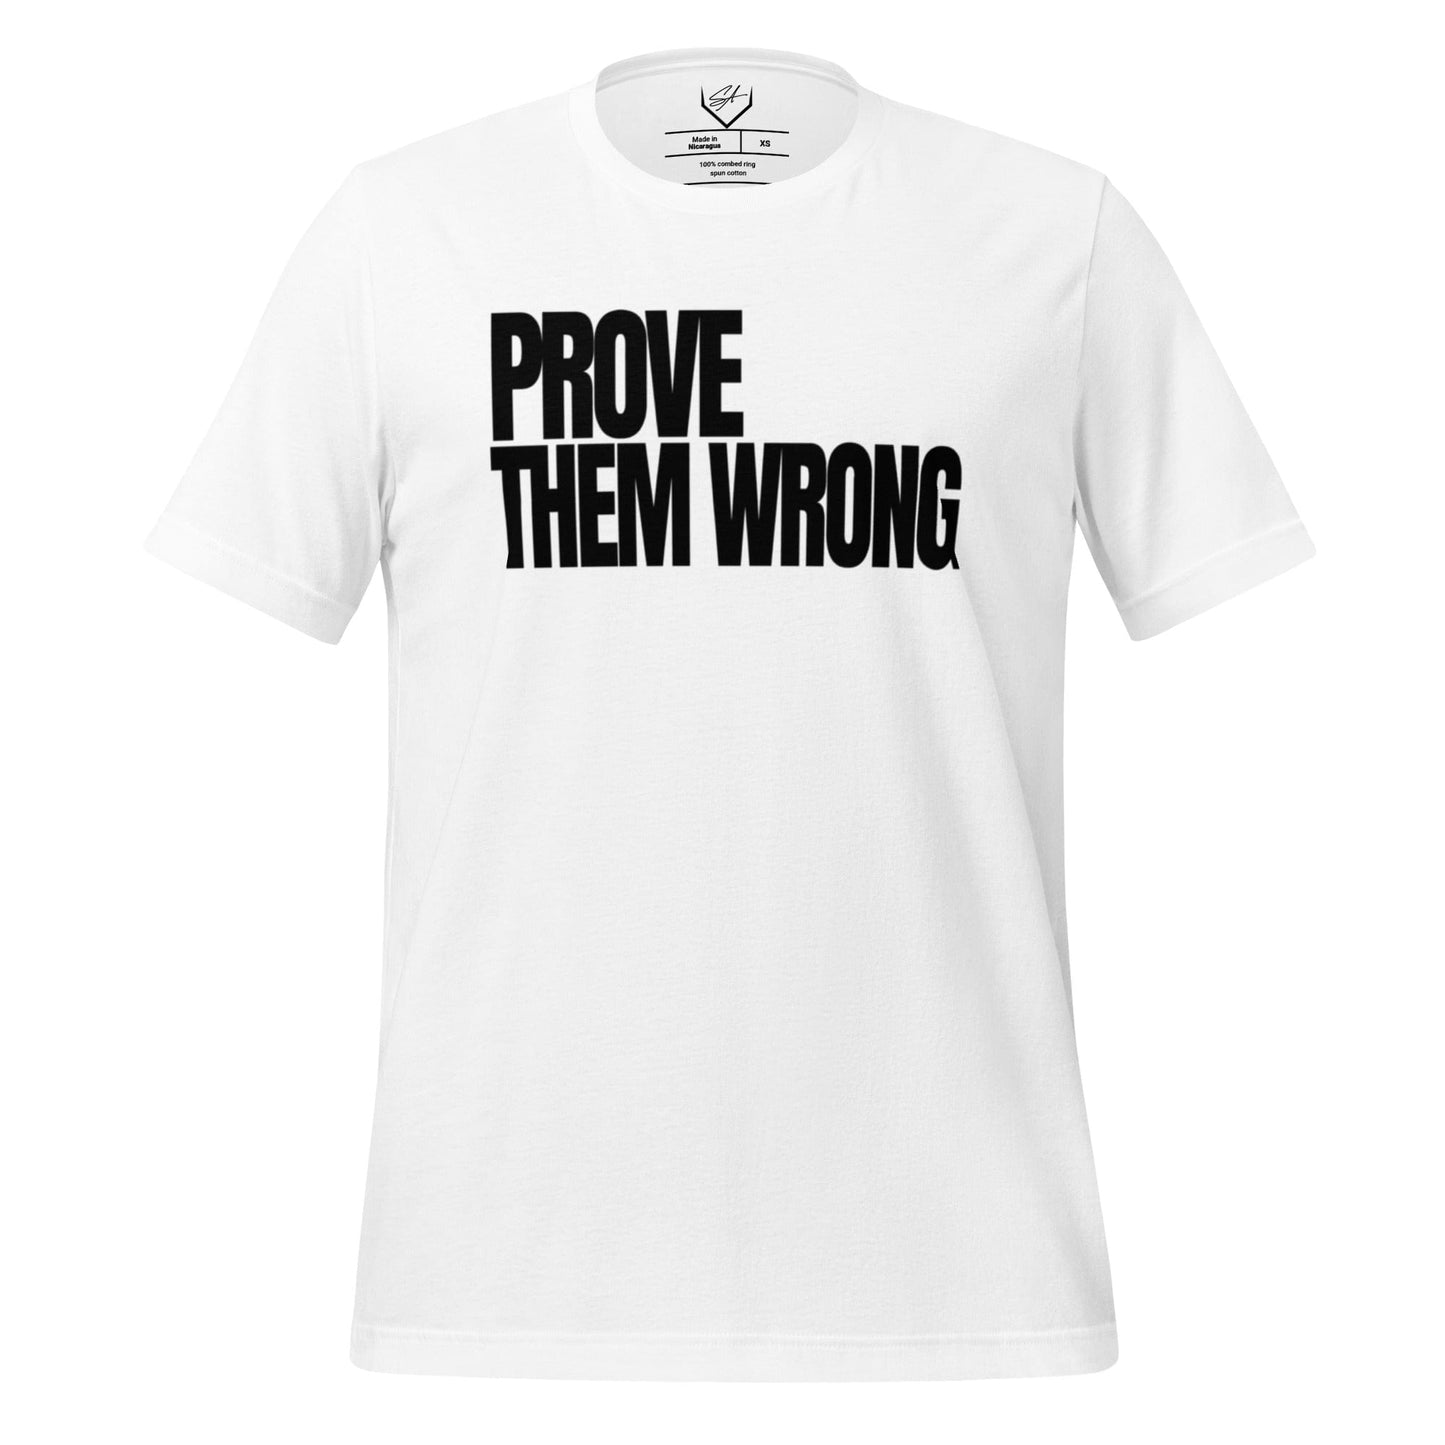 Prove Them Wrong - Adult Tee